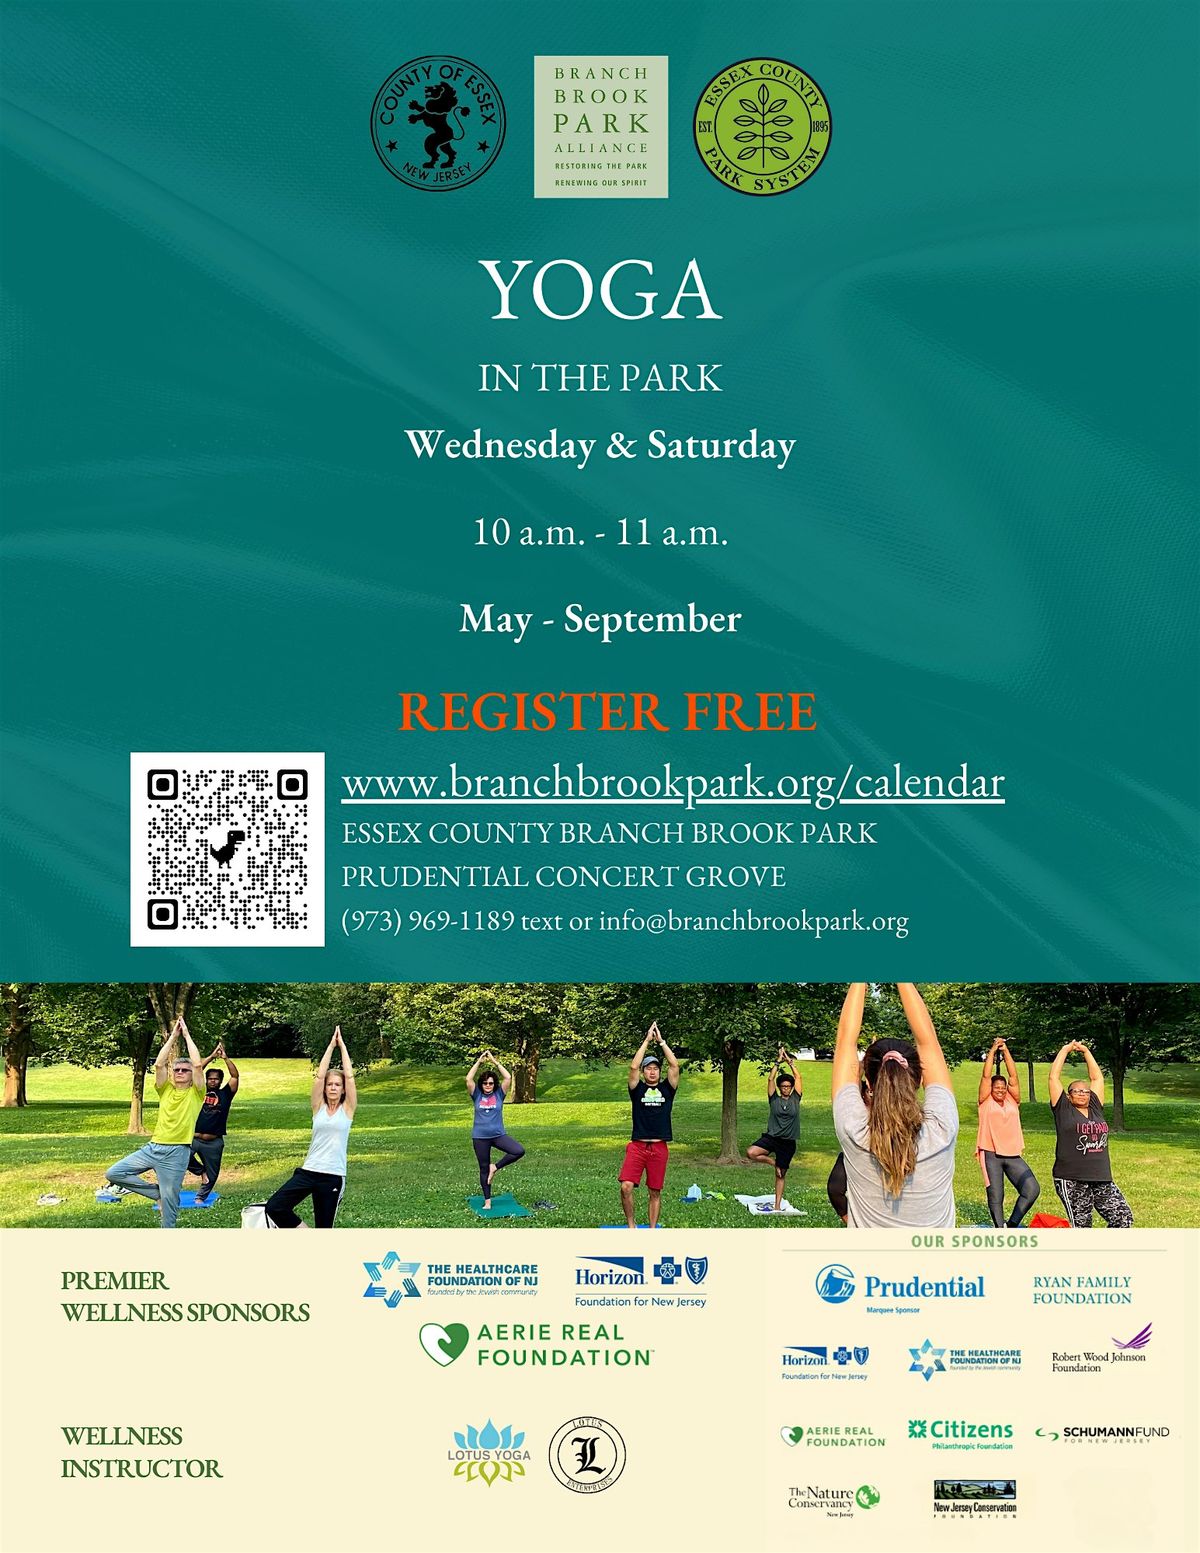 Yoga at Essex County Branch Brook Park